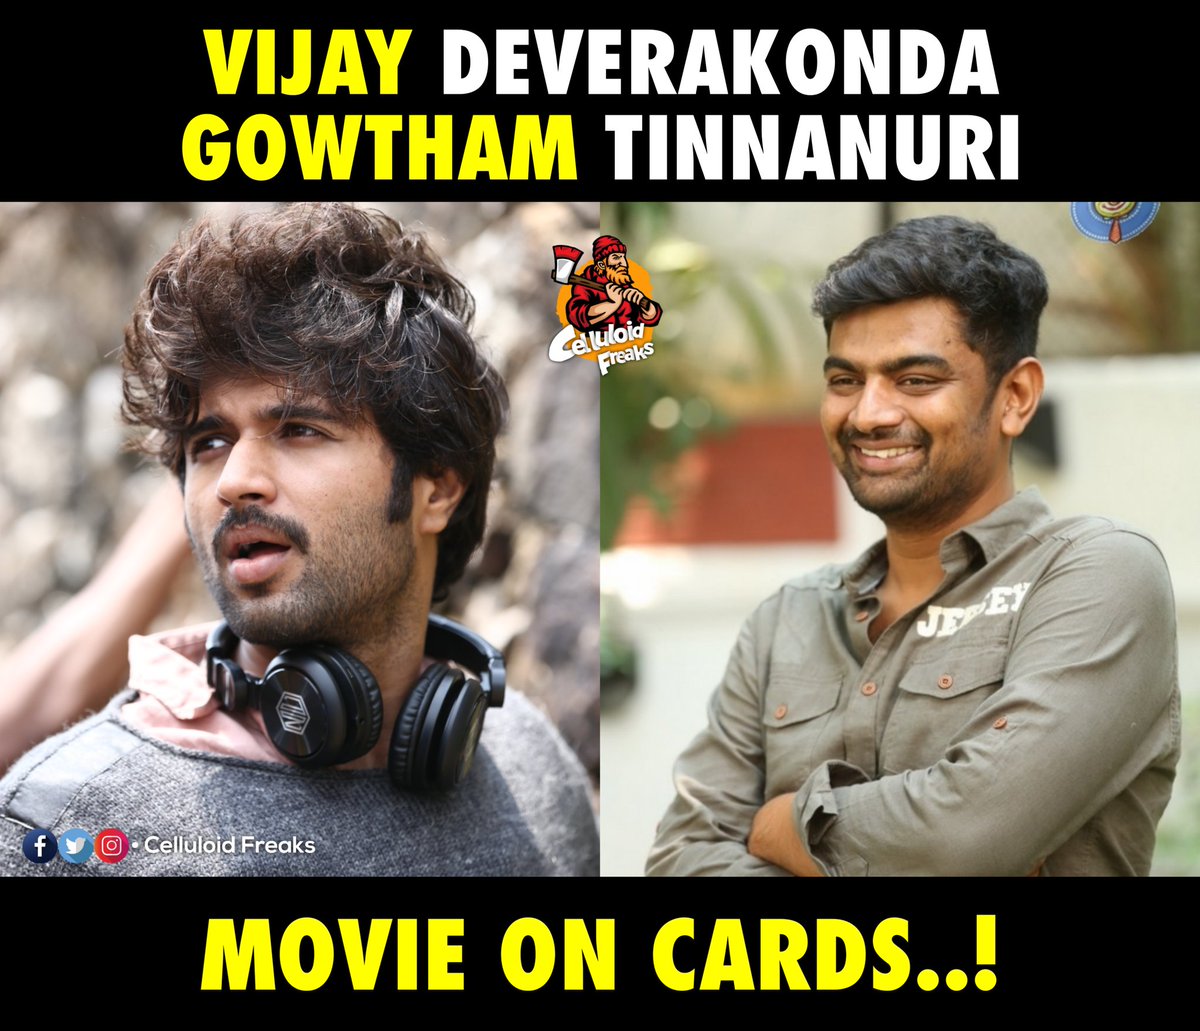 “God Father” Producers #NVPrasad will reportedly fund This Project 🎬✅

@TheDeverakonda #GowthamTinnanuri